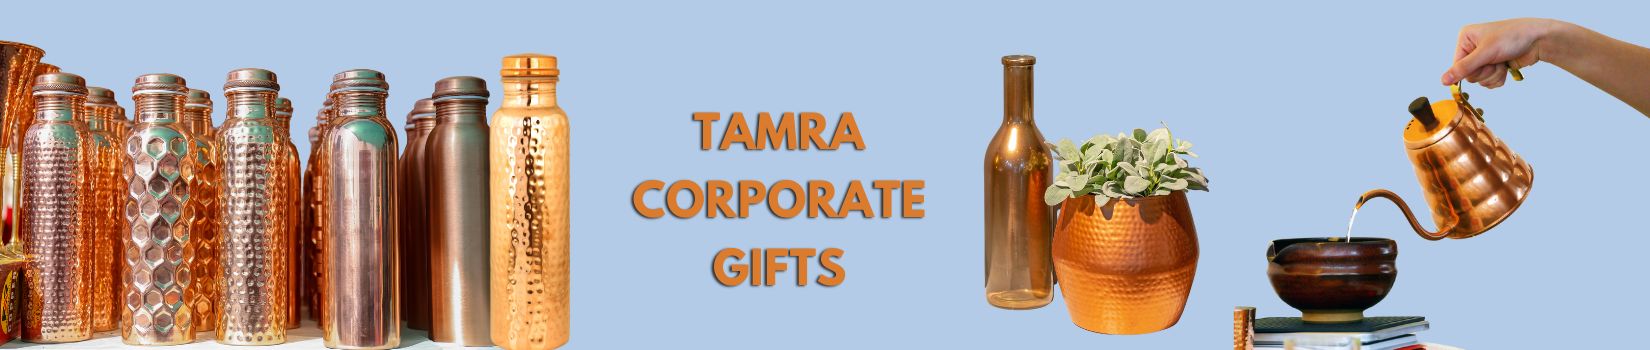 Tamra Corporate Gifts